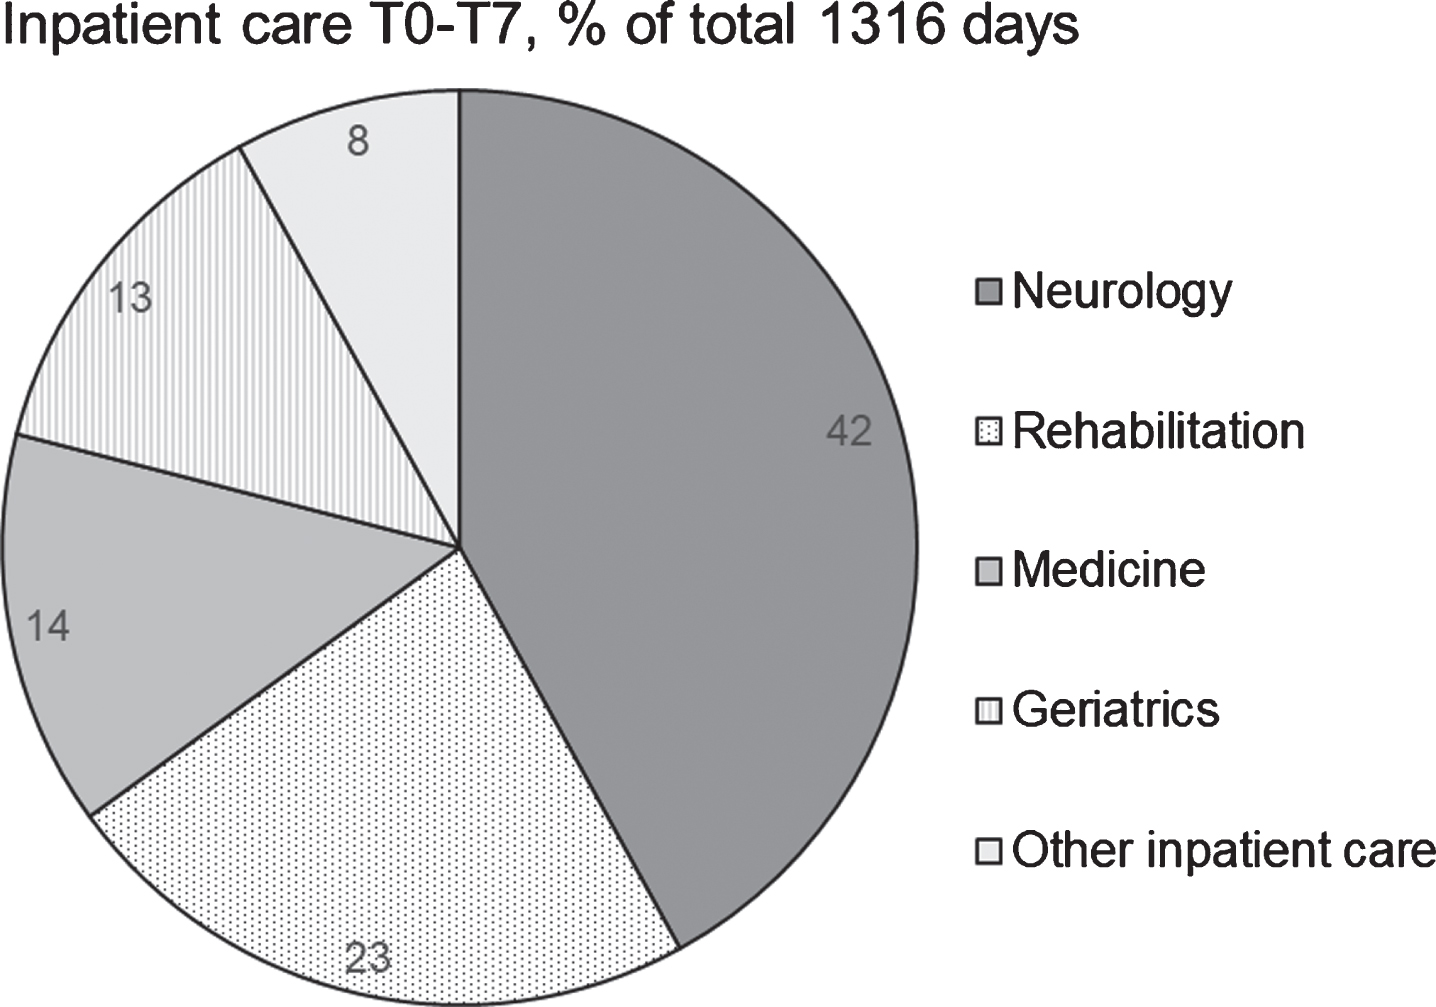 Hospital inpatient care from one year before study start (T0) until the last participated data collection (T1–T7), proportion of inpatient days at different departments. Other inpatient care includes surgery, orthopaedics, and palliative care.